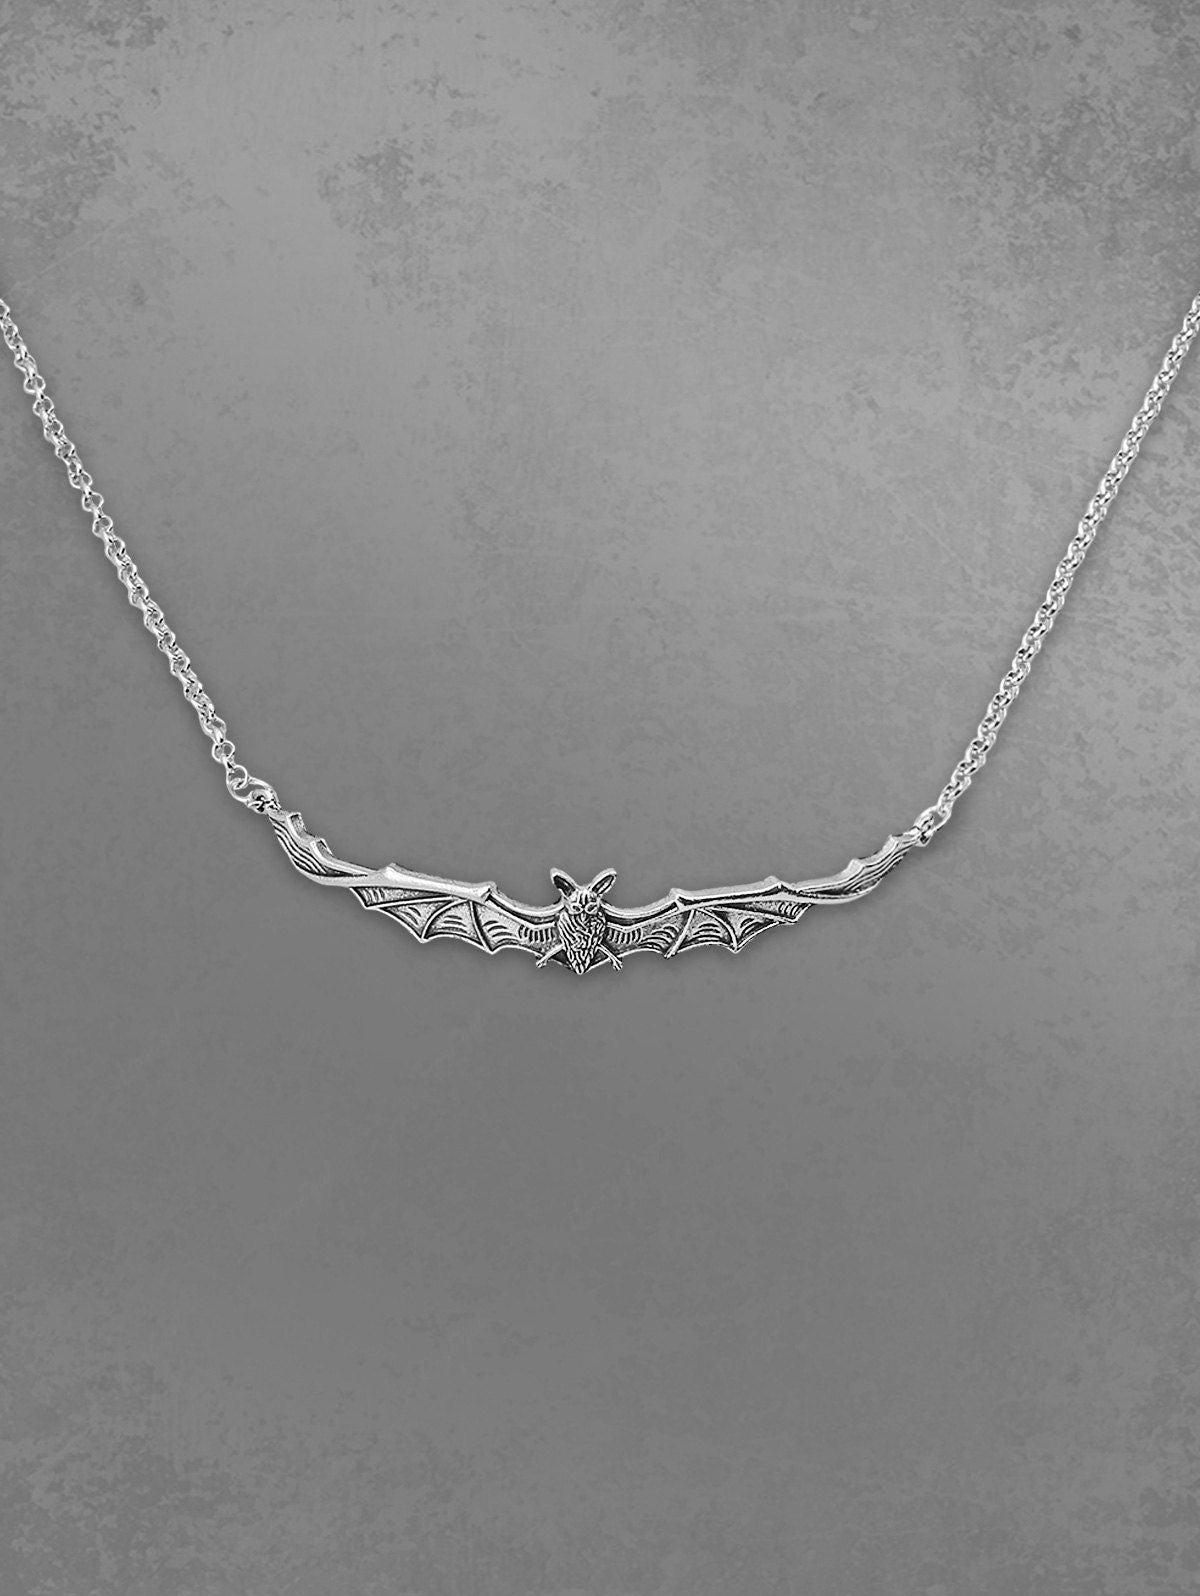 Bat Wings Shaped Necklace